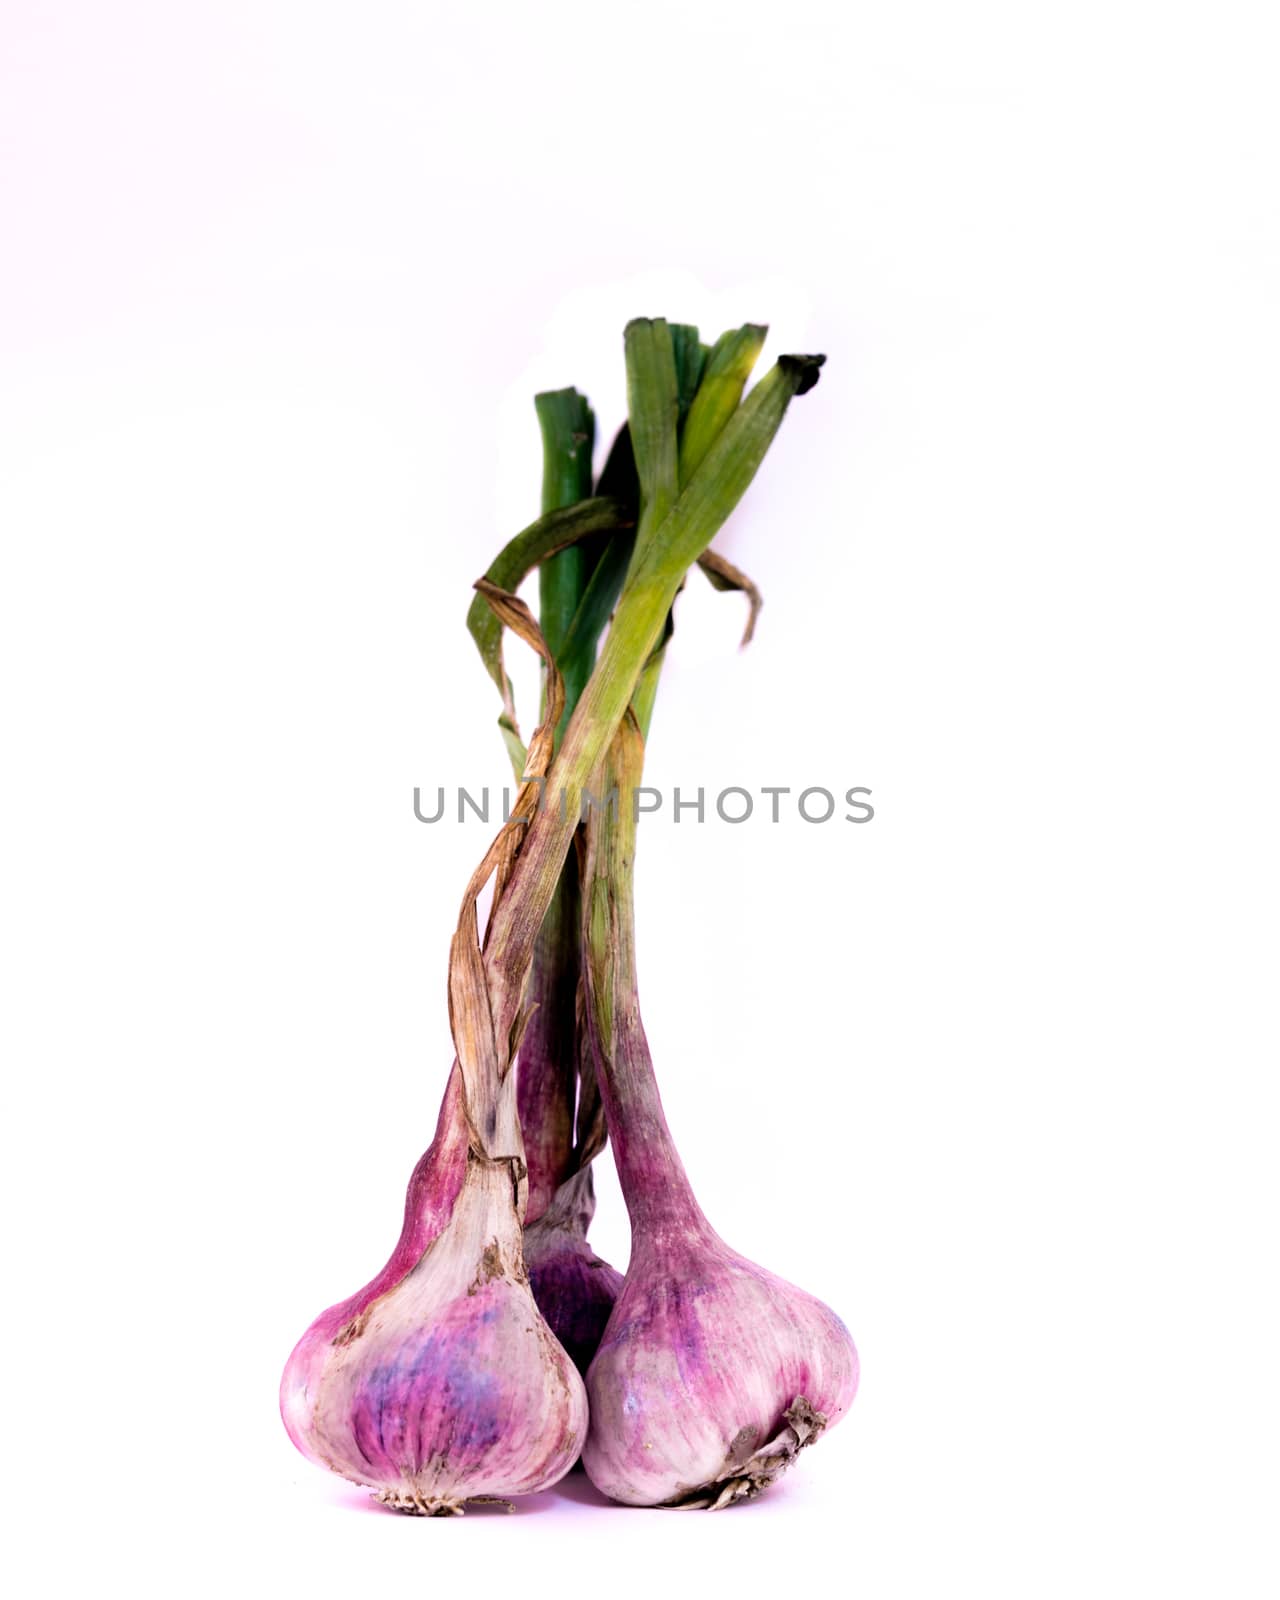 Close-up view a bunch of fresh organic garlic bulbs isolated on white background. They are freshly picked from home growth garden in Vietnam. Food concept with clipping path and copyspace.